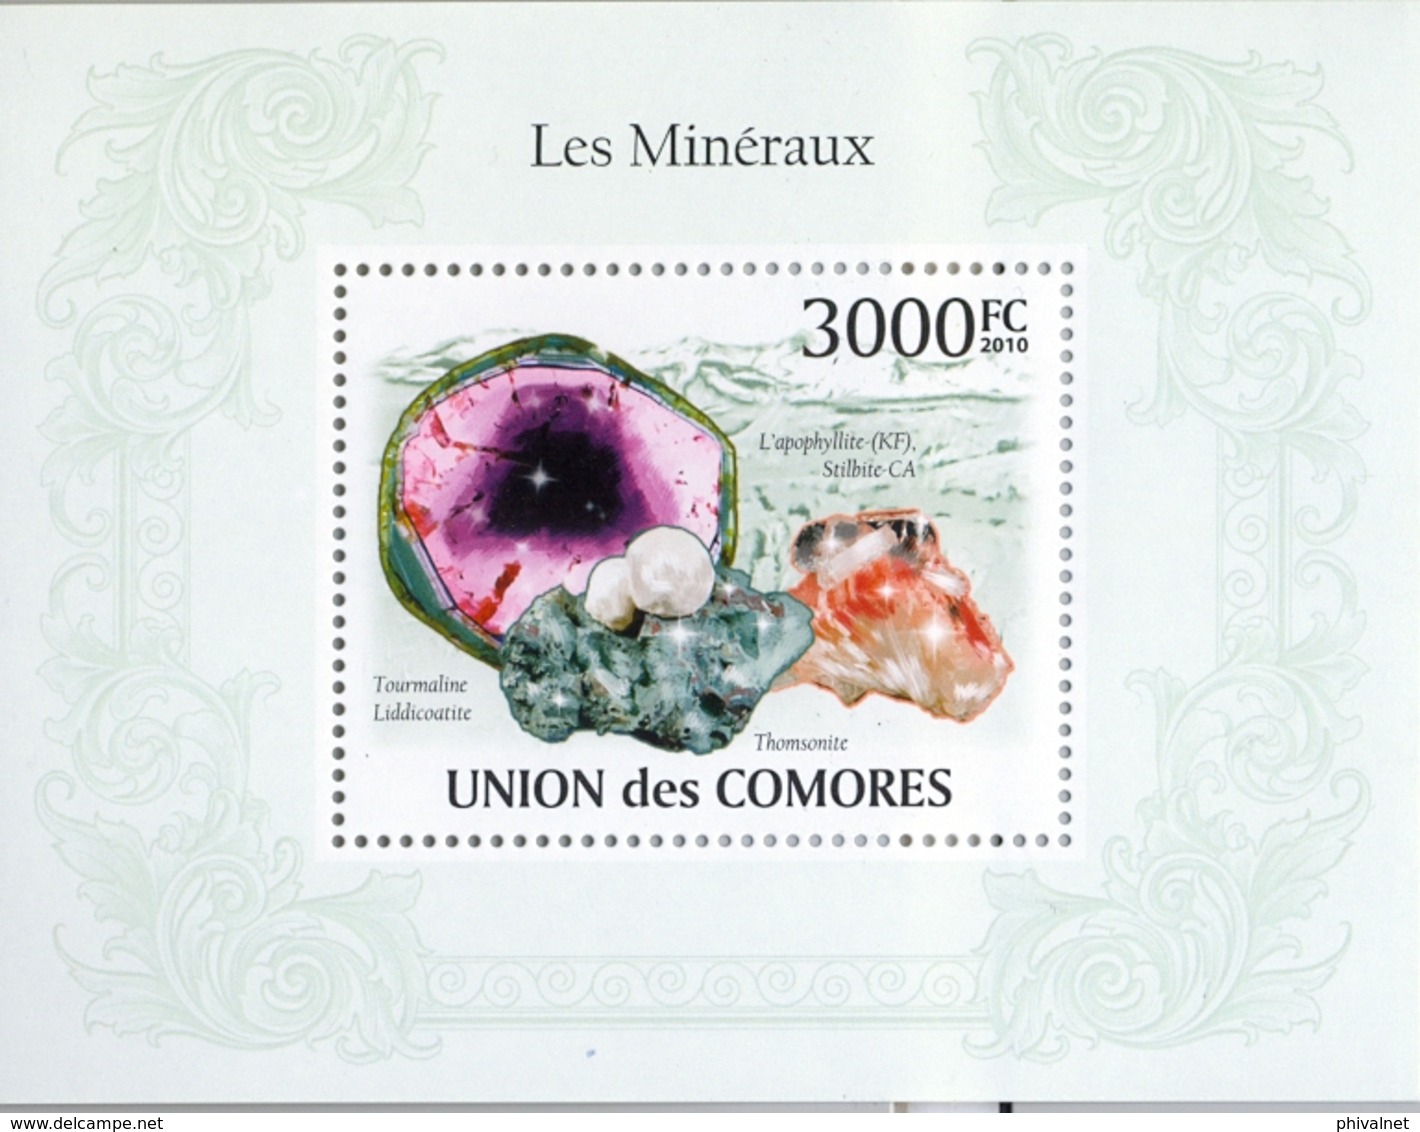 COMORES, MNH , MINERALES , MINERAUX , MINERALS , GEOLOGIA , MINERIA , GEOLOGY , MINING - Minerales